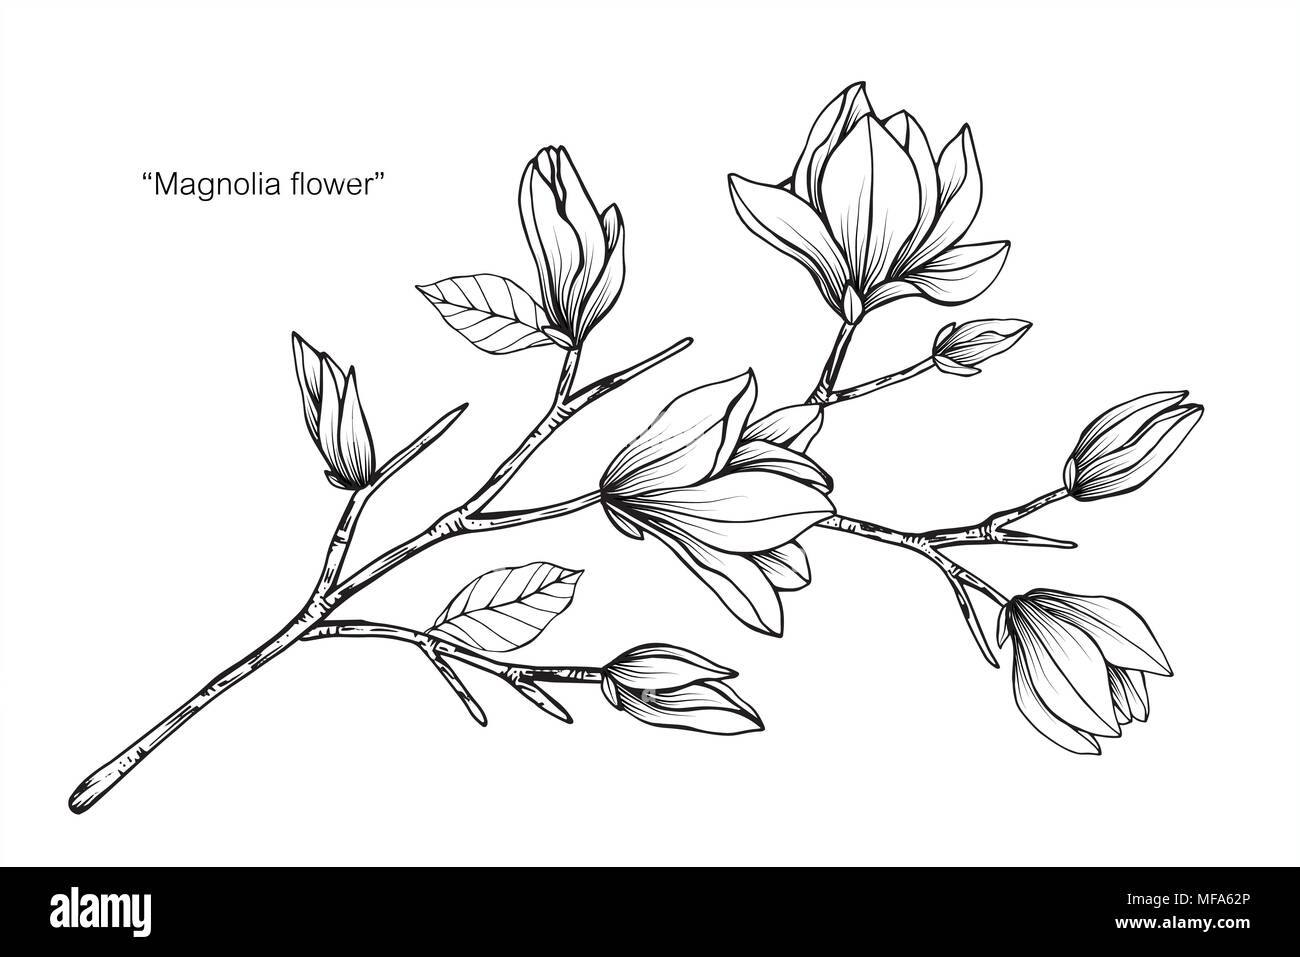 How to Draw a Magnolia Flower - Easy Drawing Tutorial For Kids